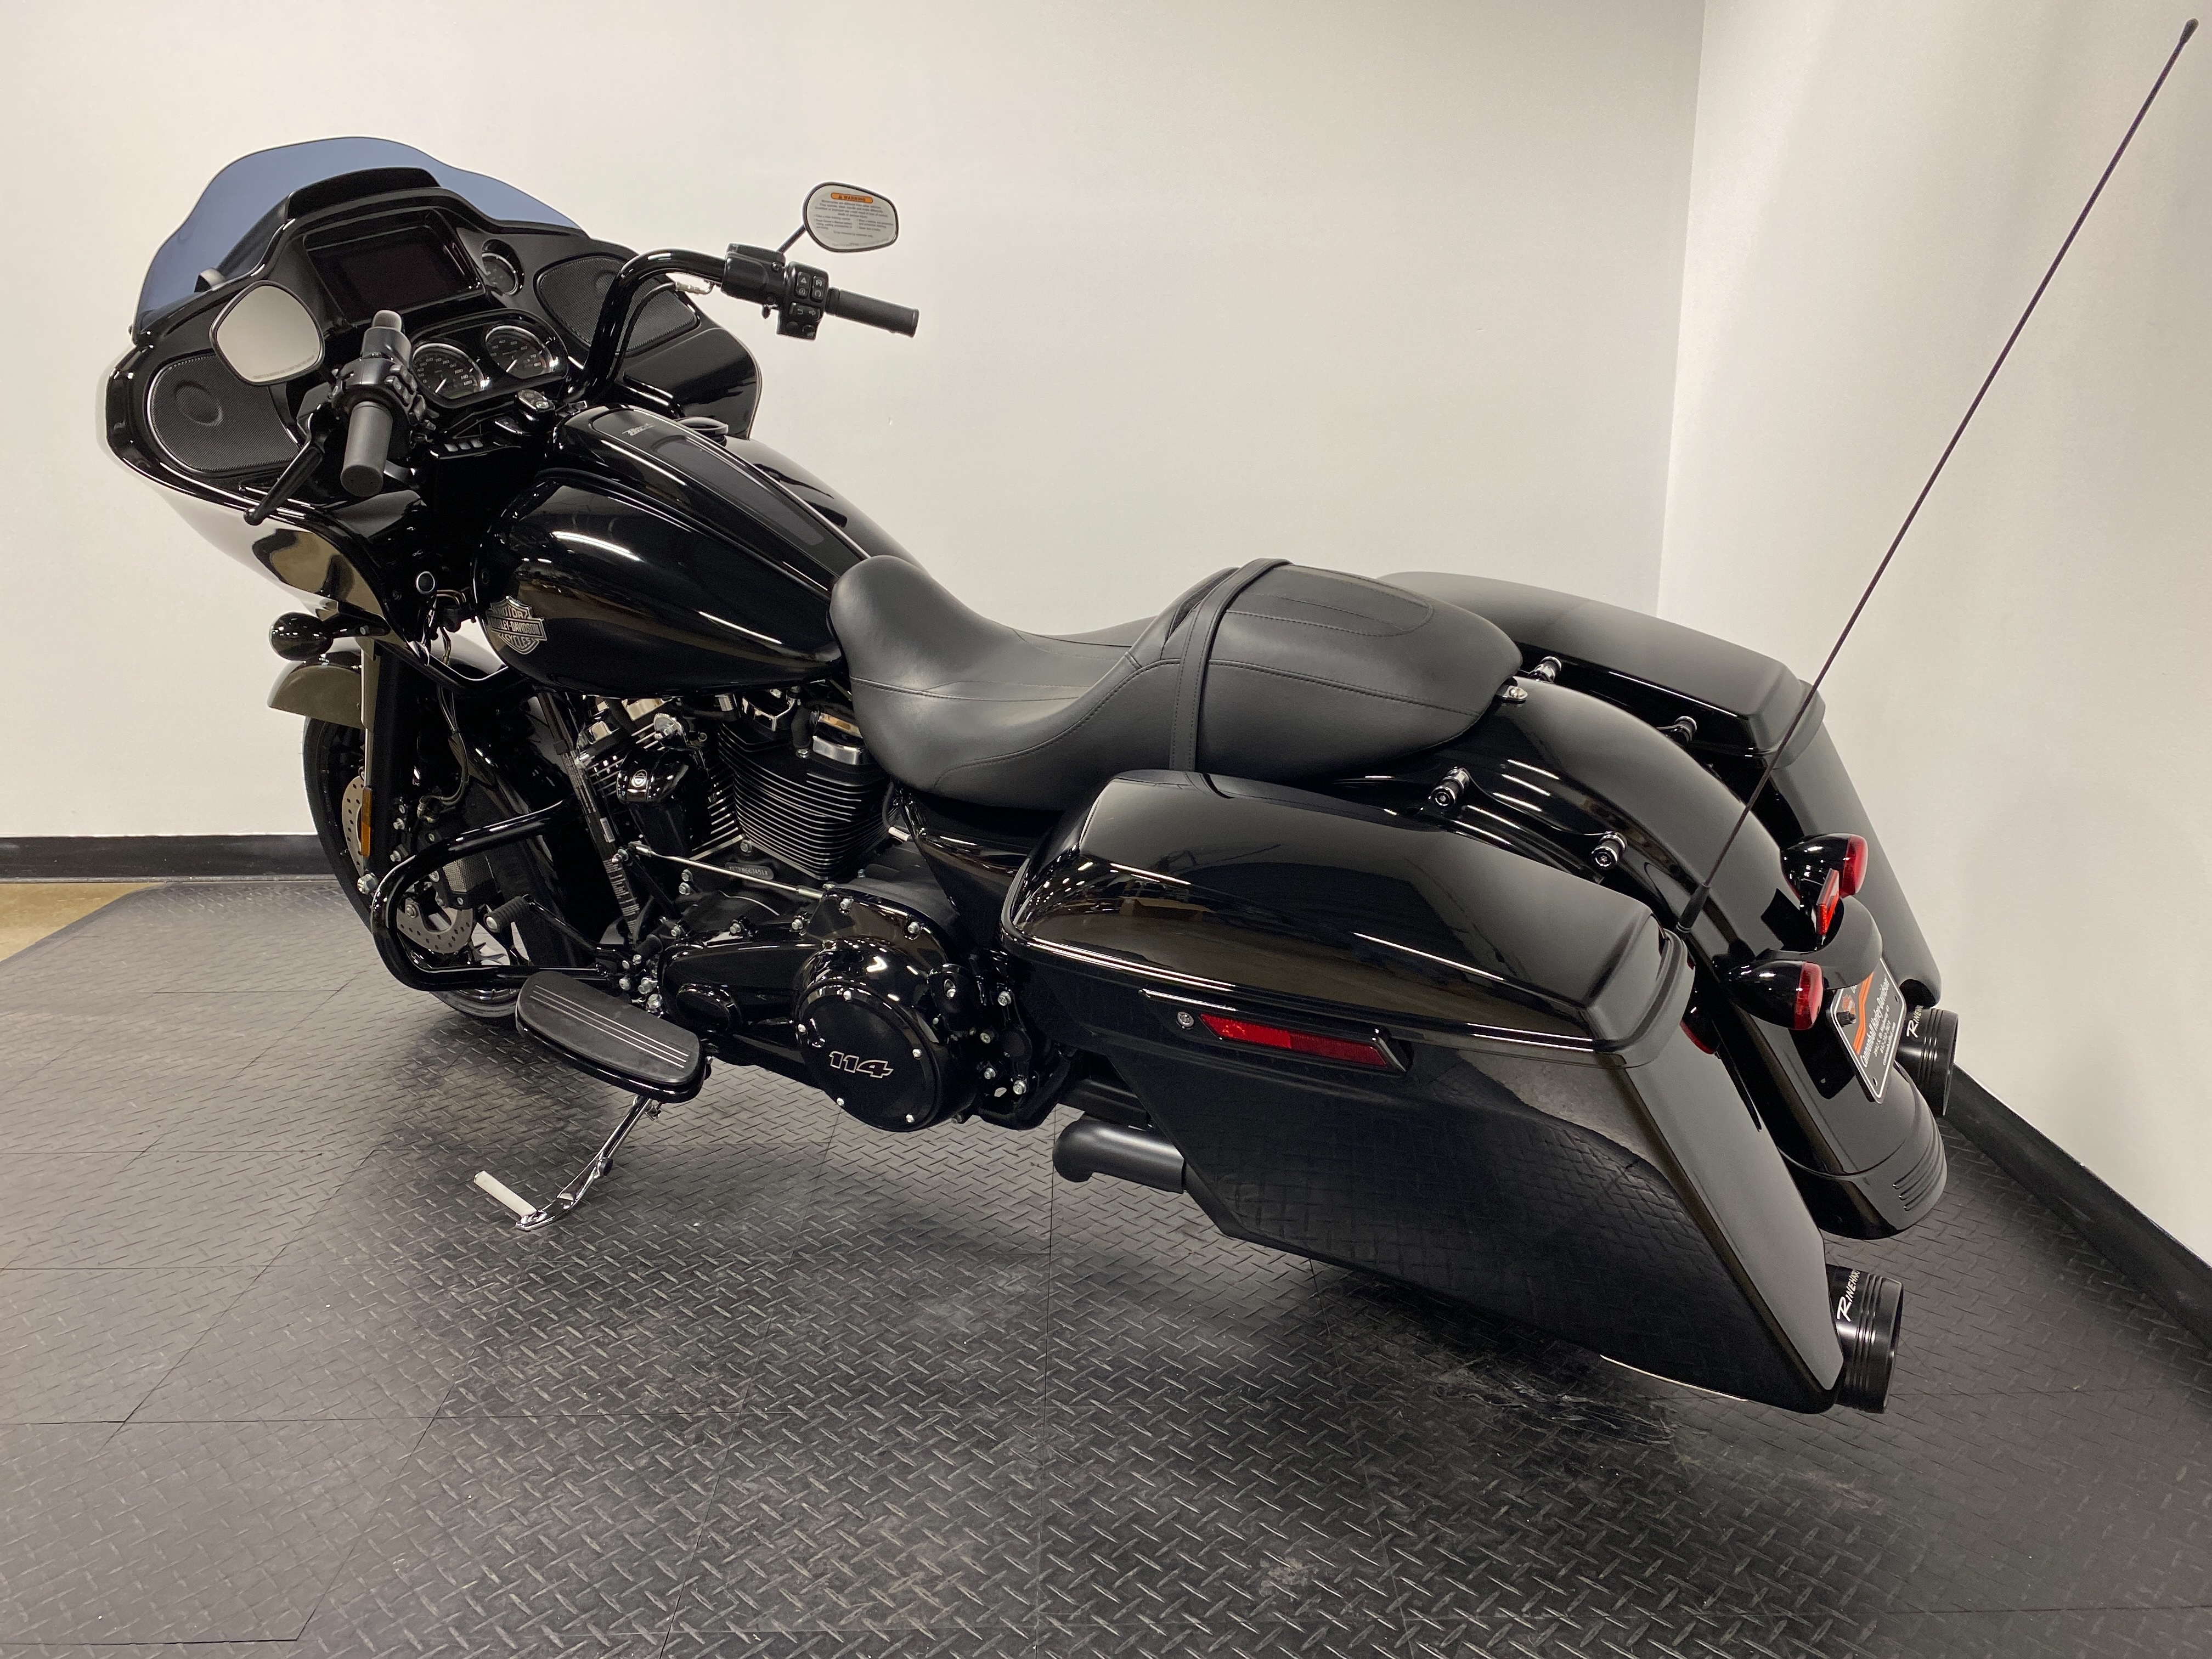 2021 Harley-Davidson Grand American Touring Road Glide Special at Cannonball Harley-Davidson